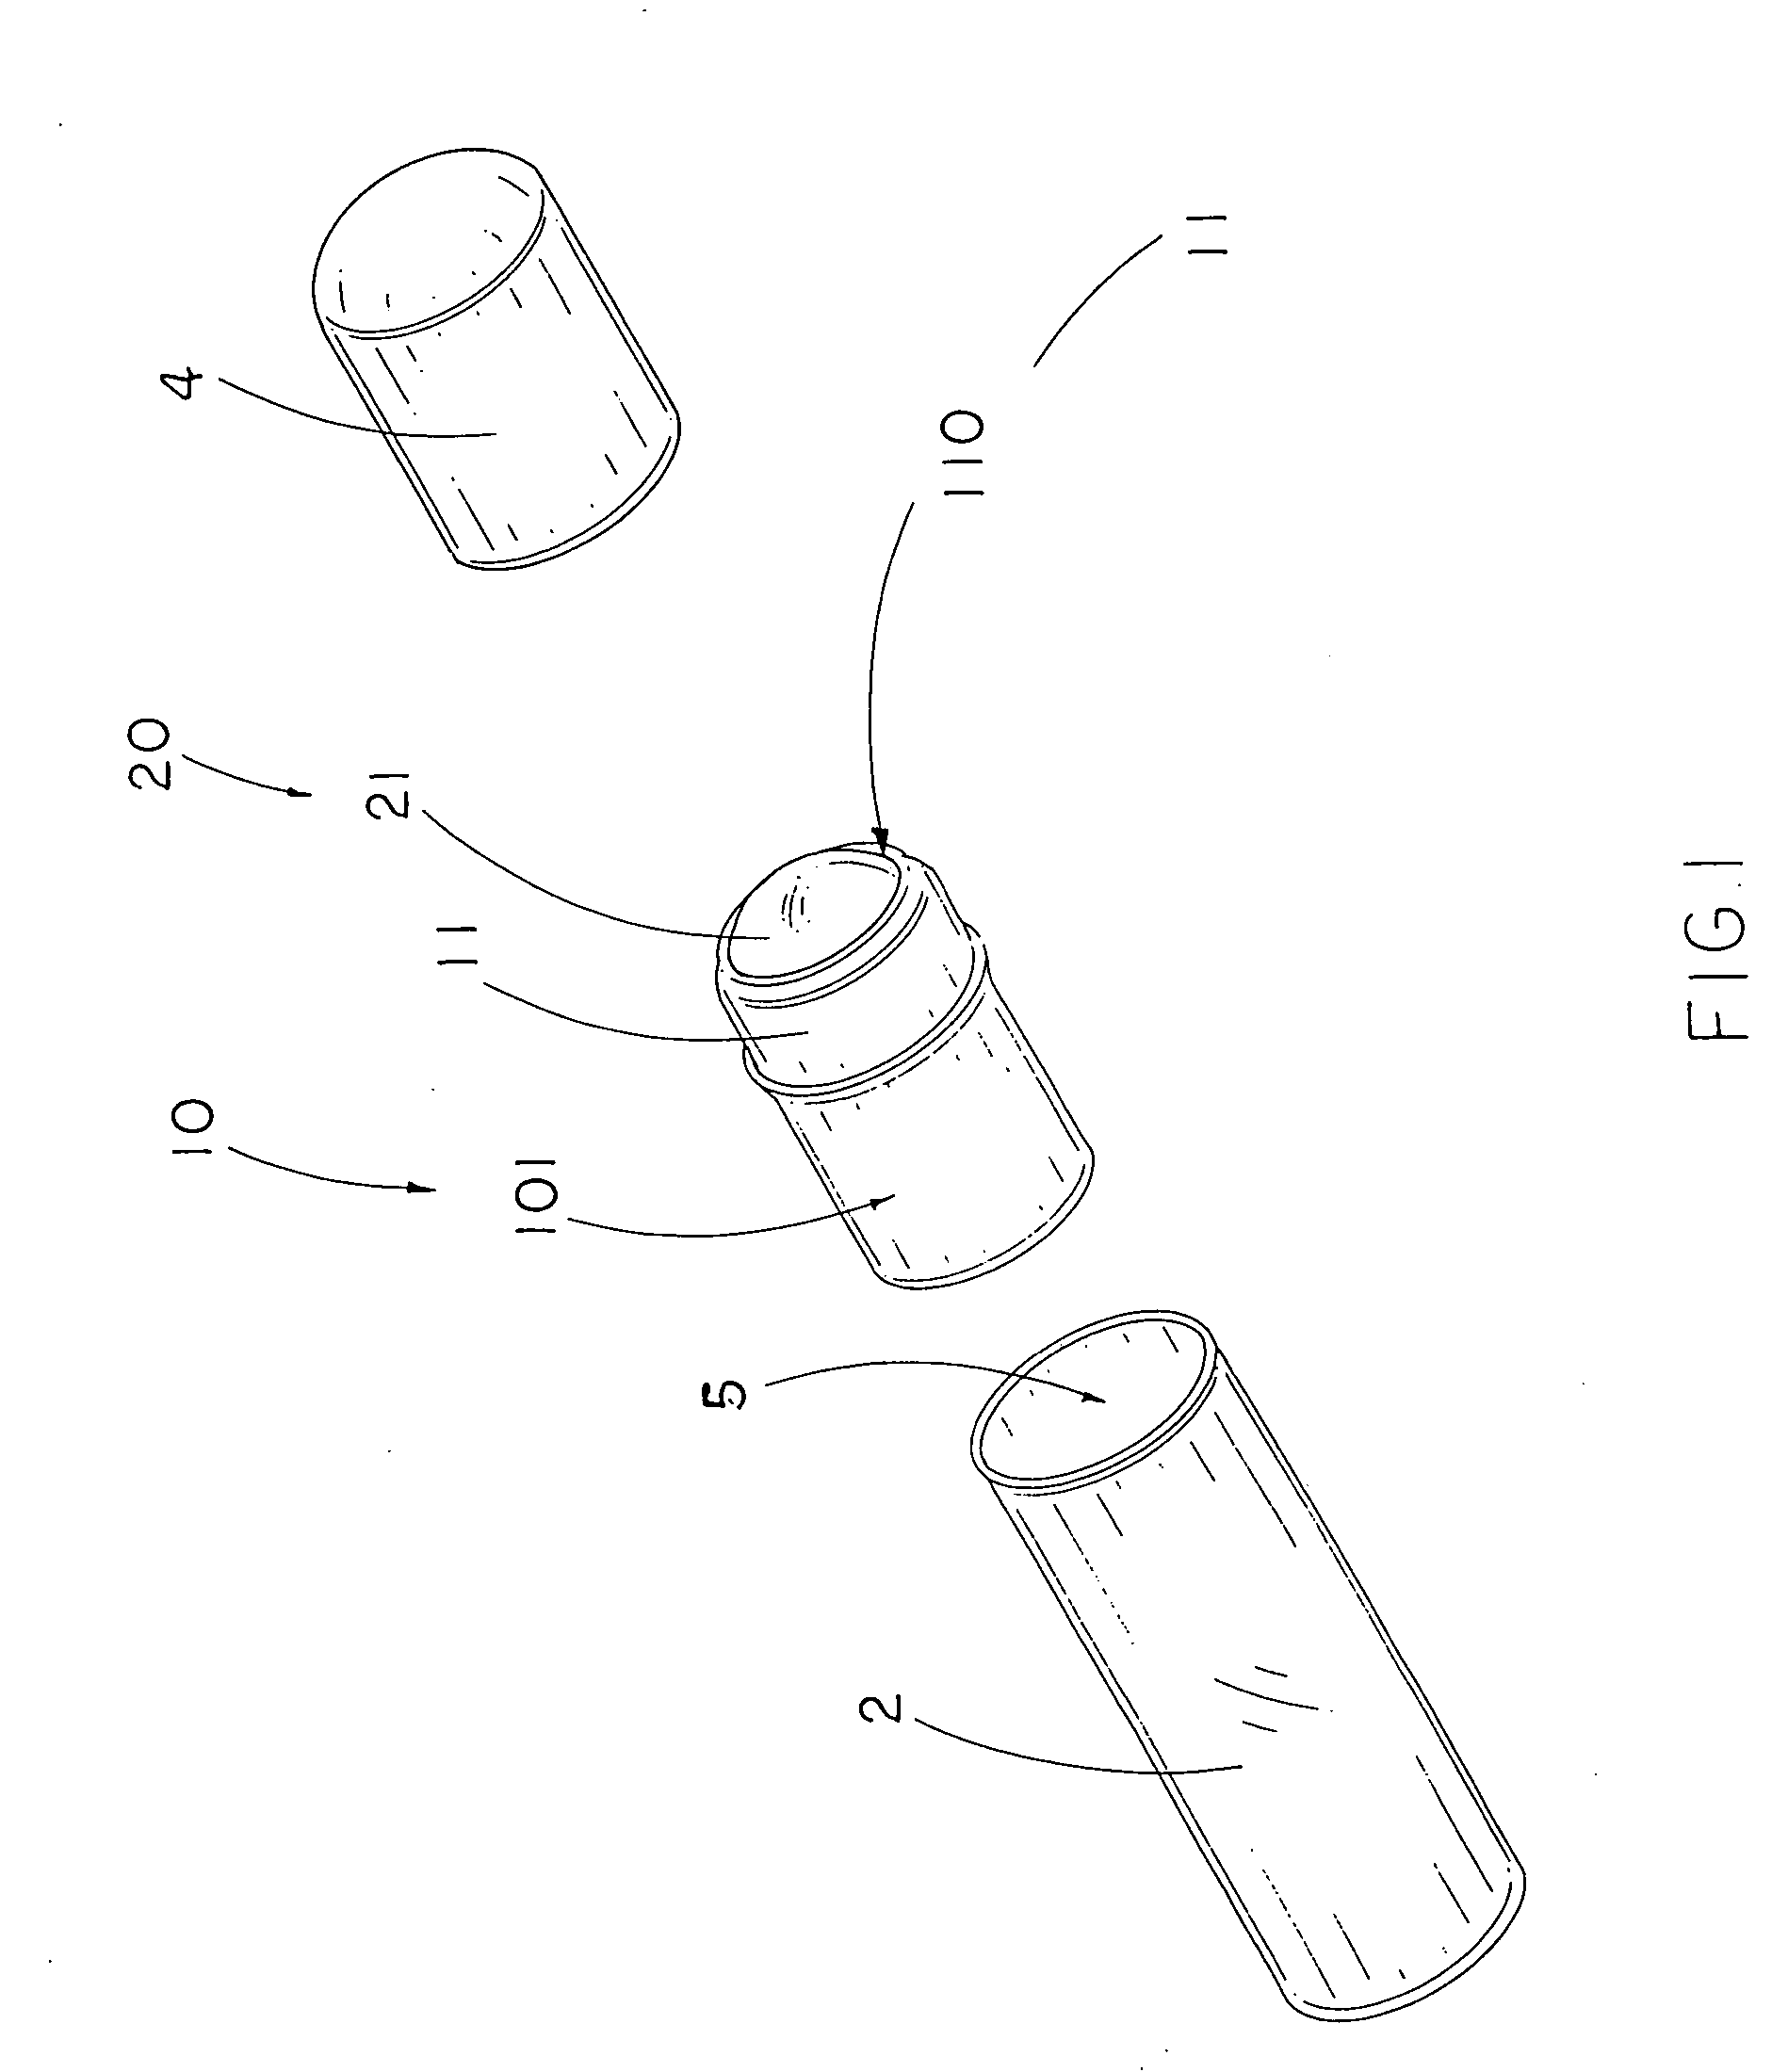 Dispenser head for fluid container